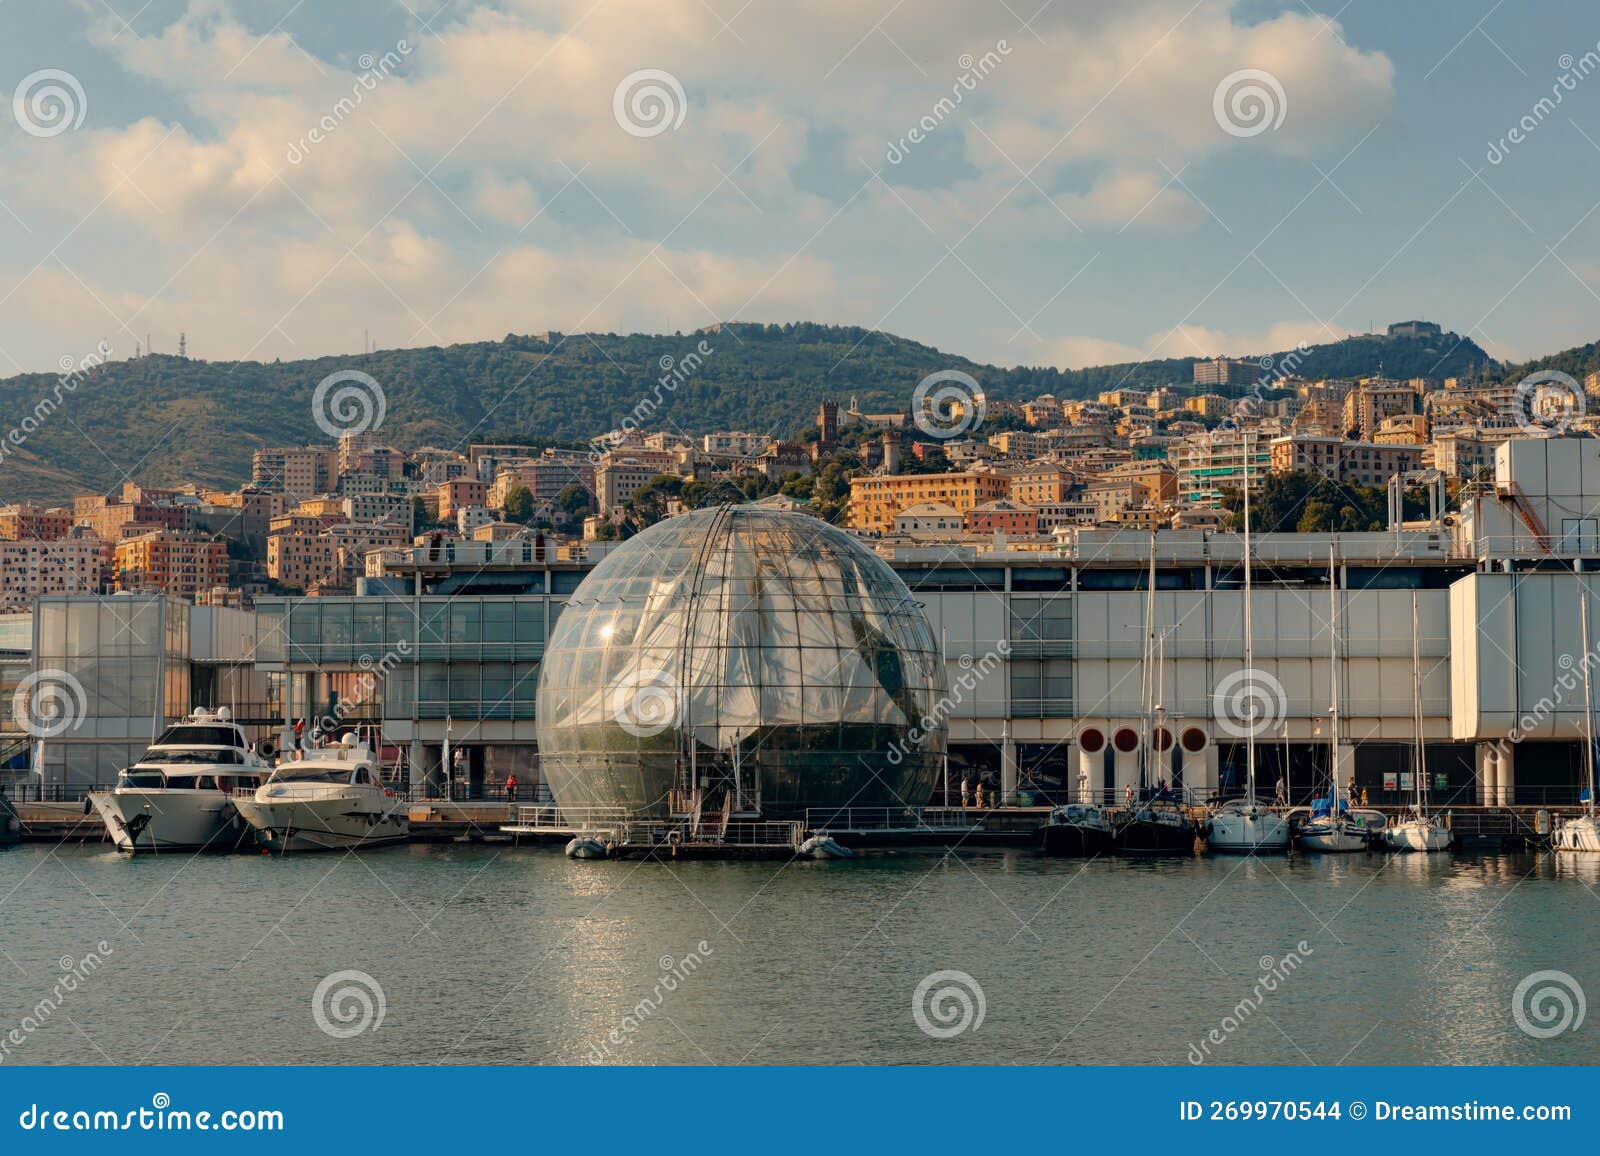 view of the port of genoa dominated by the biosphere green house ed by renzo piano